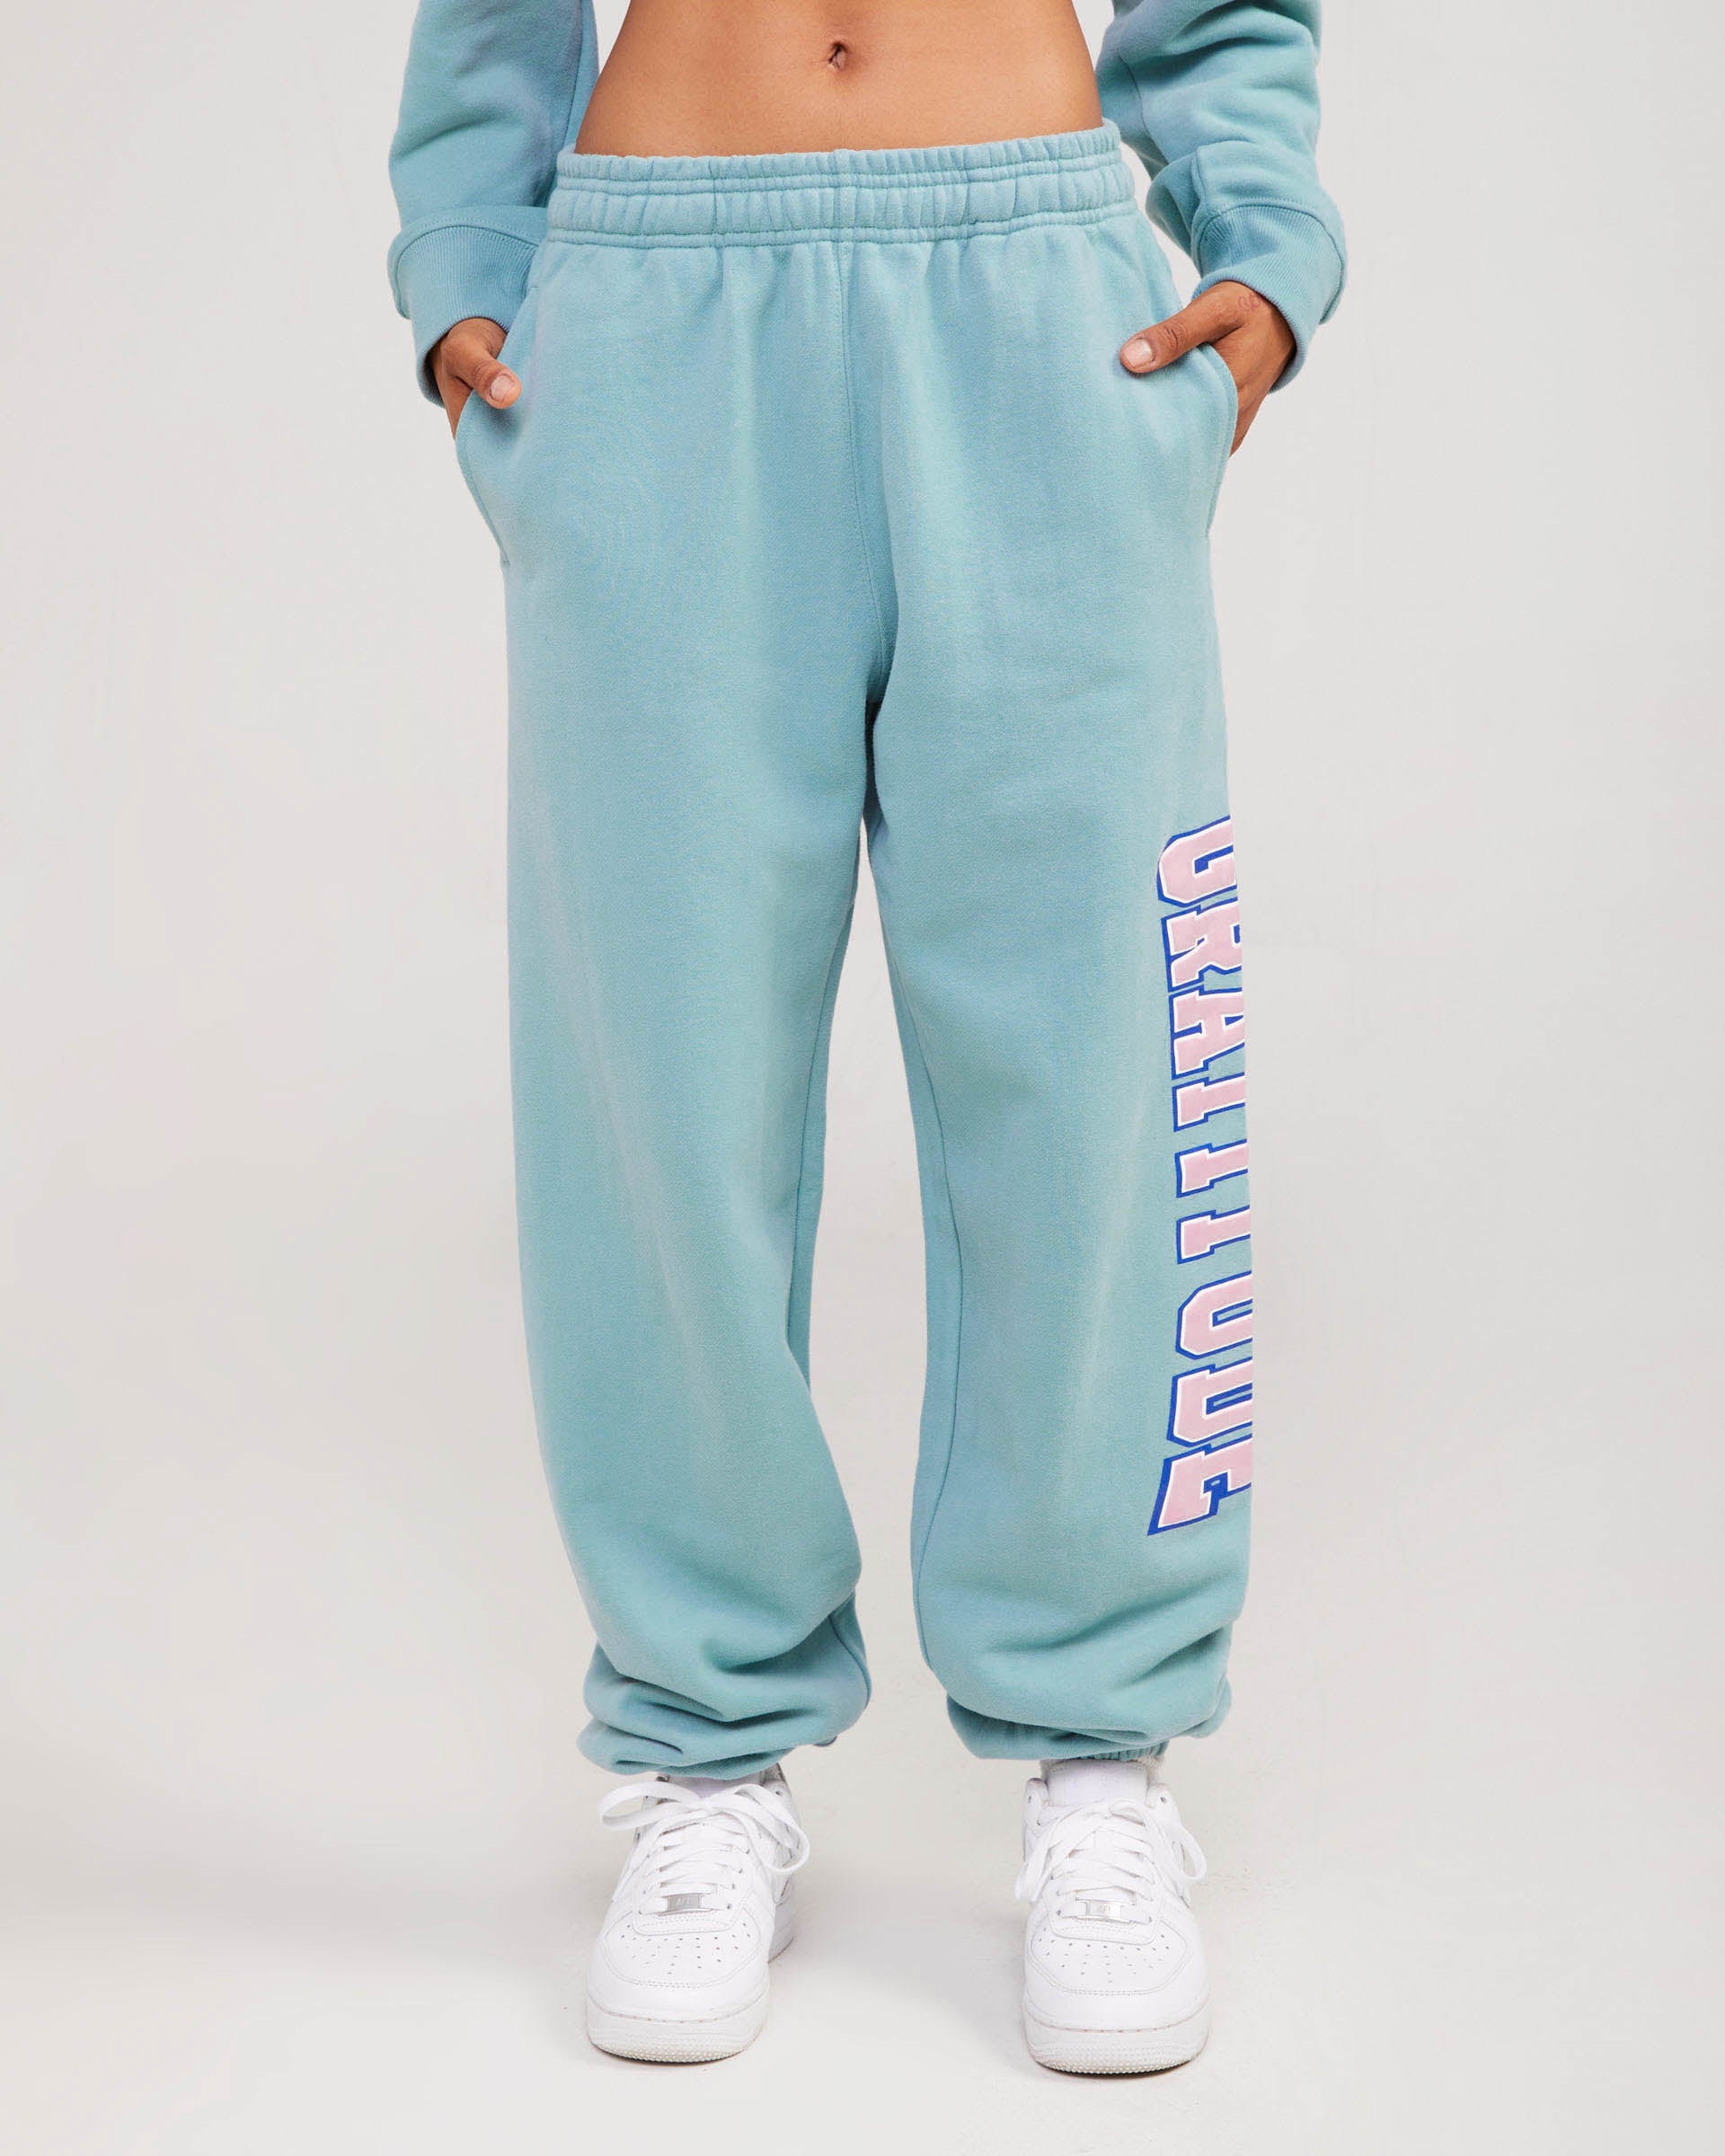 teal sweatpants with gratitude graphic